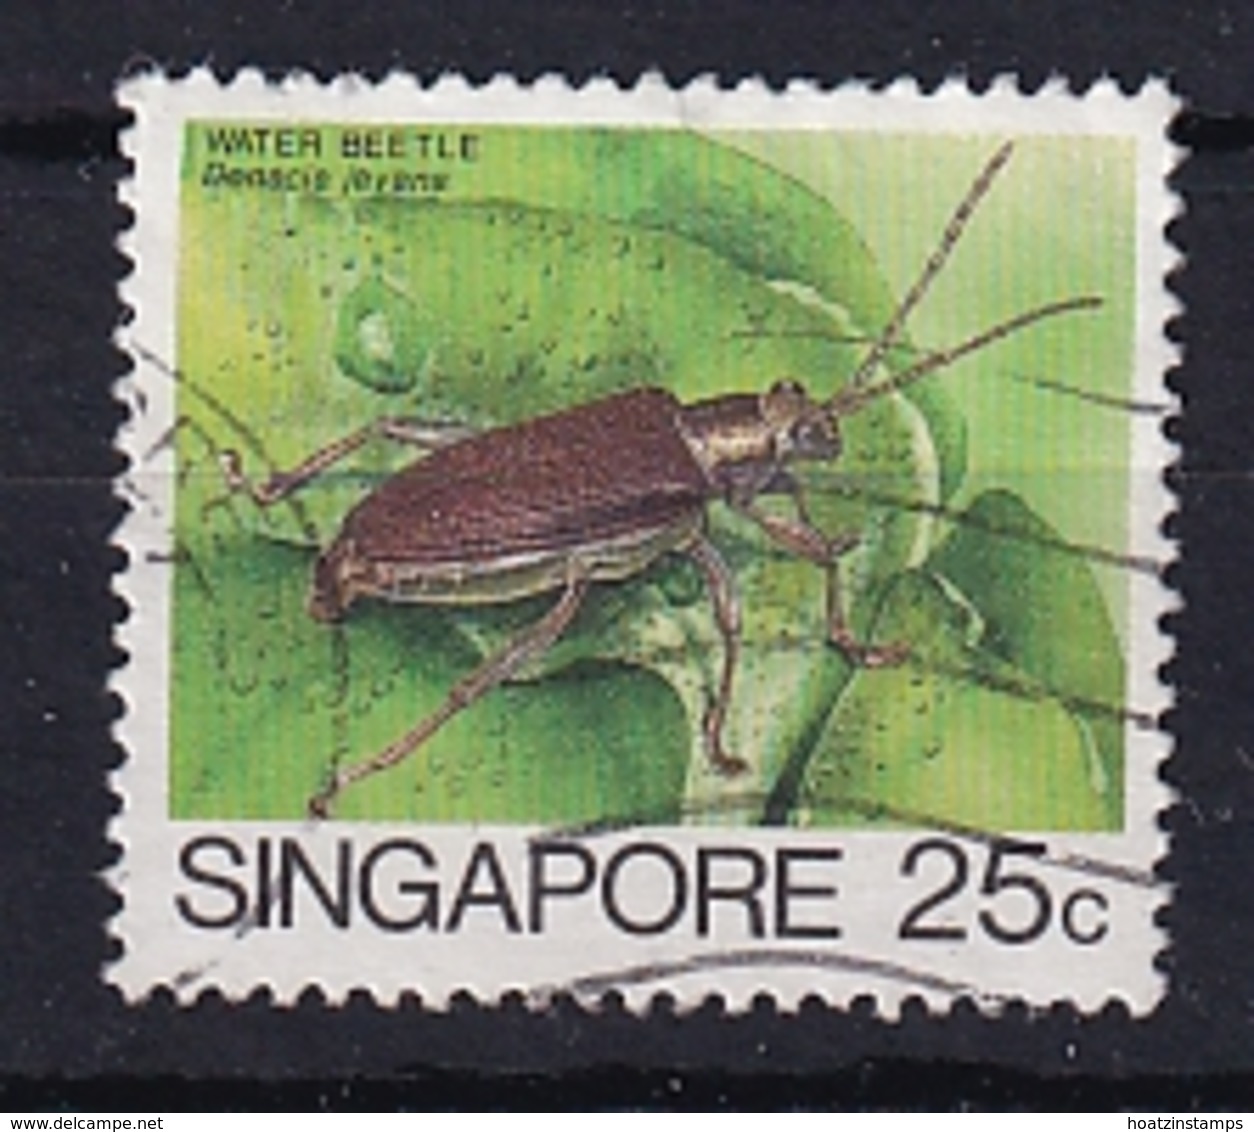 Singapore: 1985/89   Insects    SG495a    25c   [Leigh Mardon Printing]     Used - Singapur (1959-...)